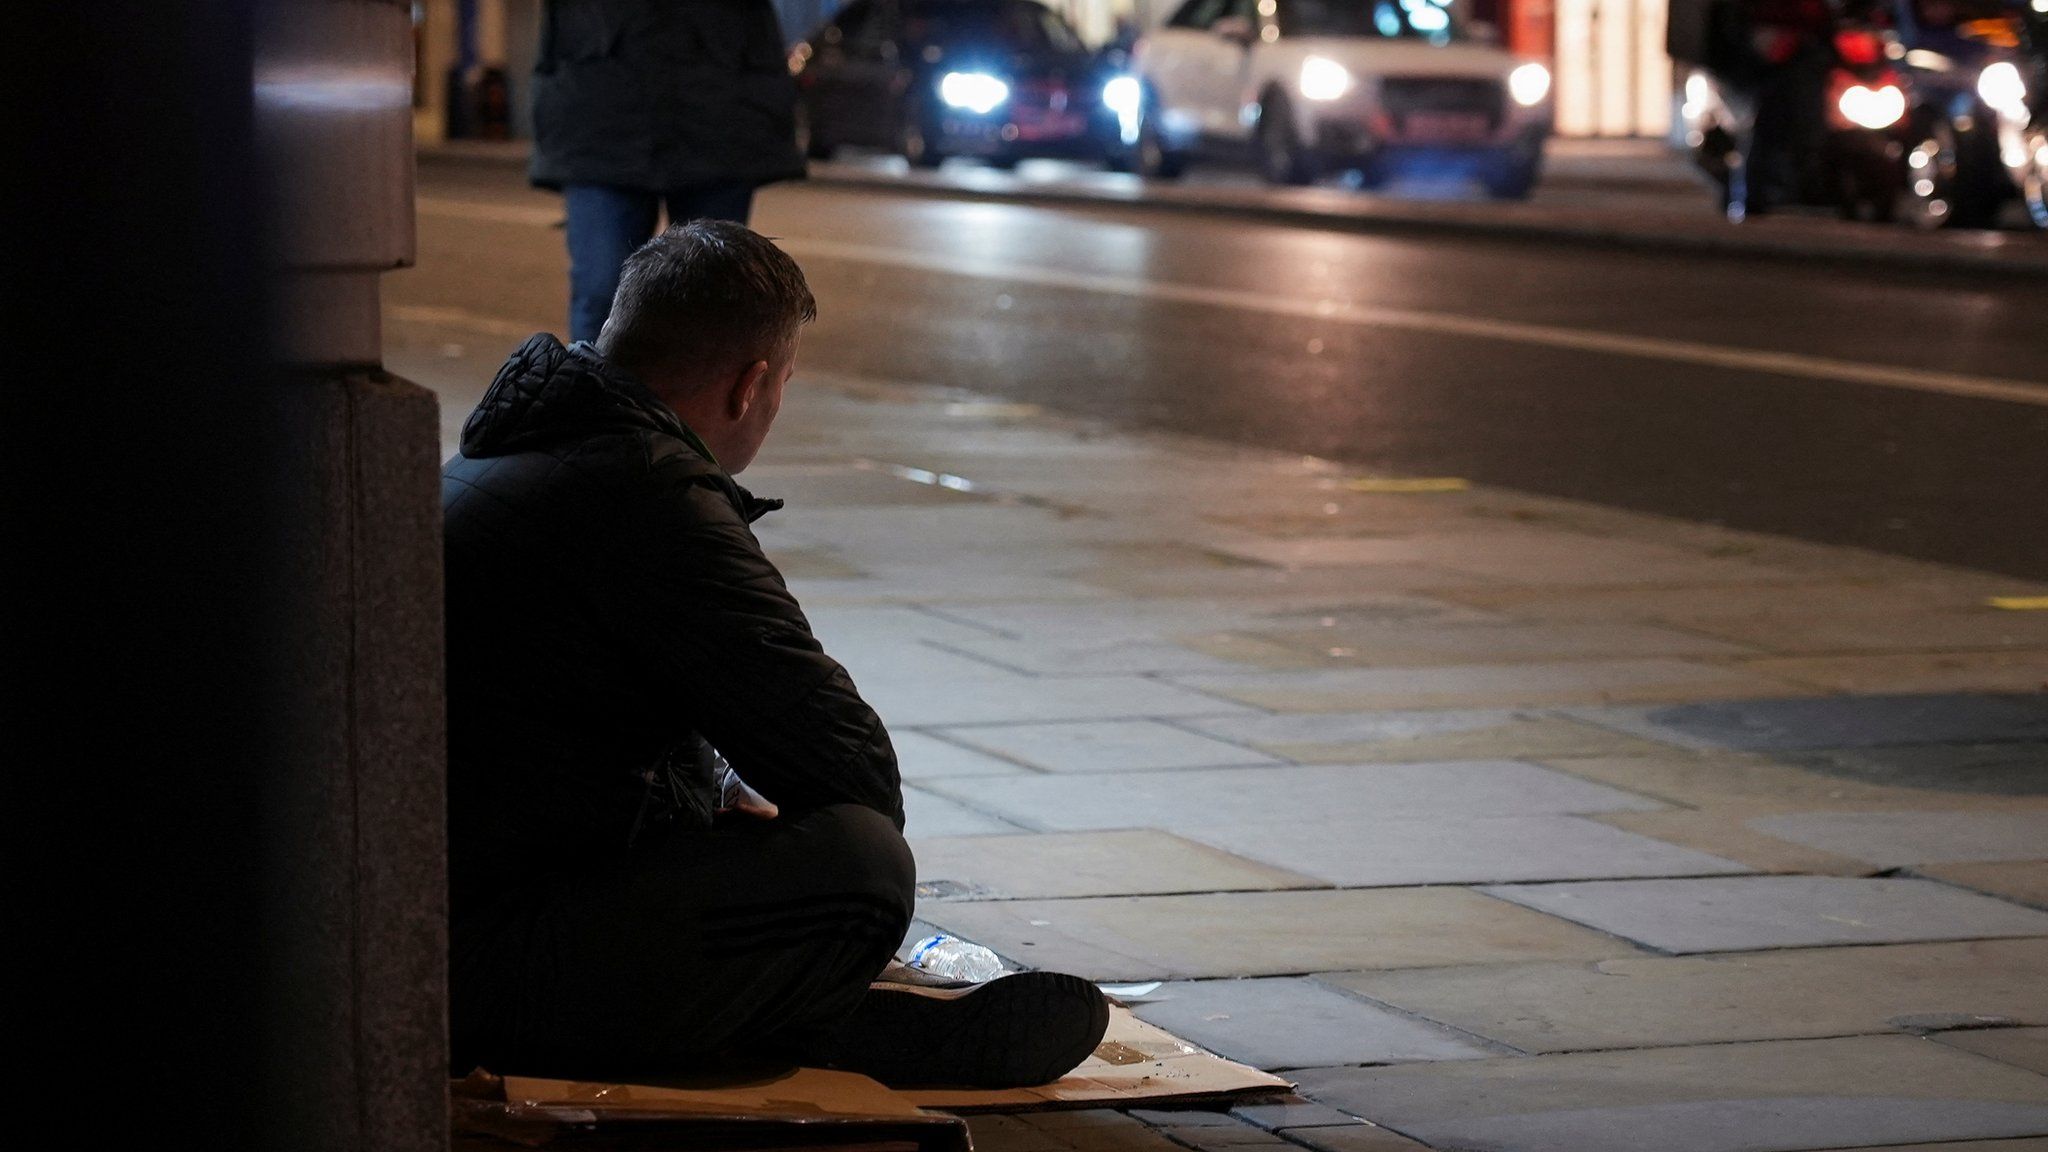 A homeless person on the street as cars pass by